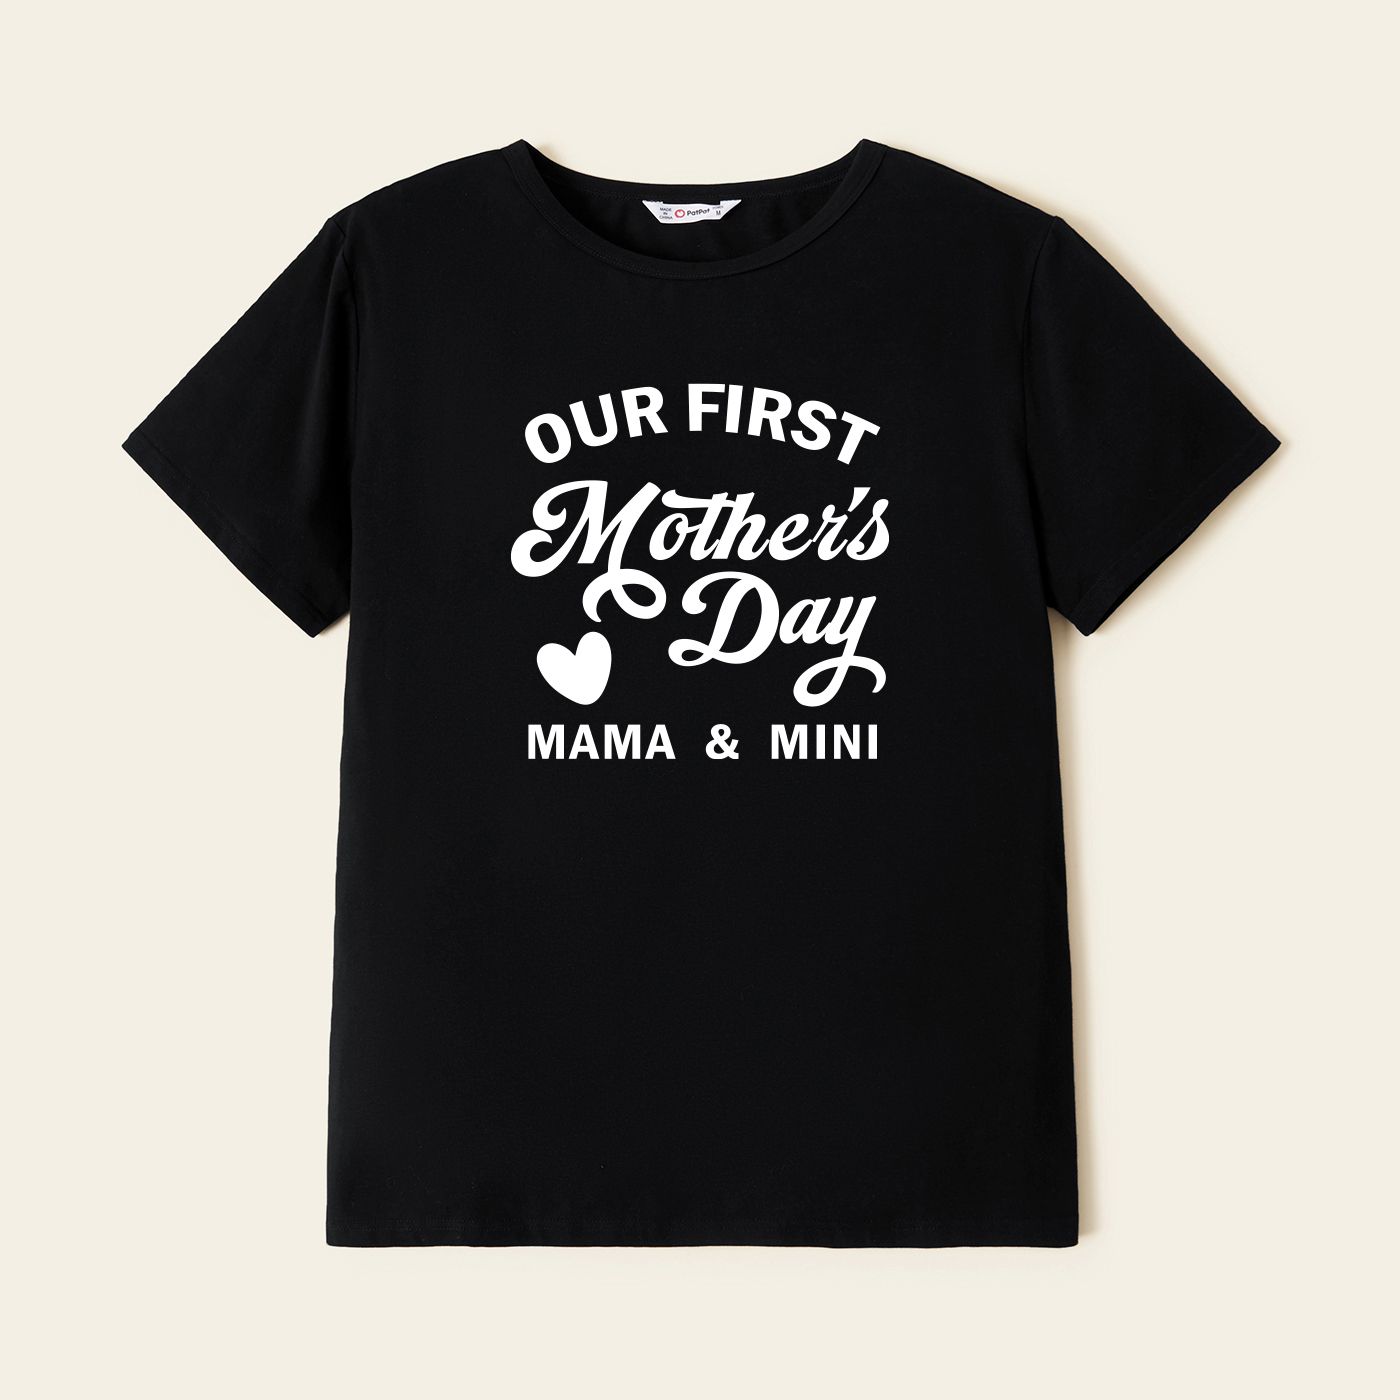 Mother's Day Mommy and Me Black Short Sleeves Letter Printed Festival Celebration Tops